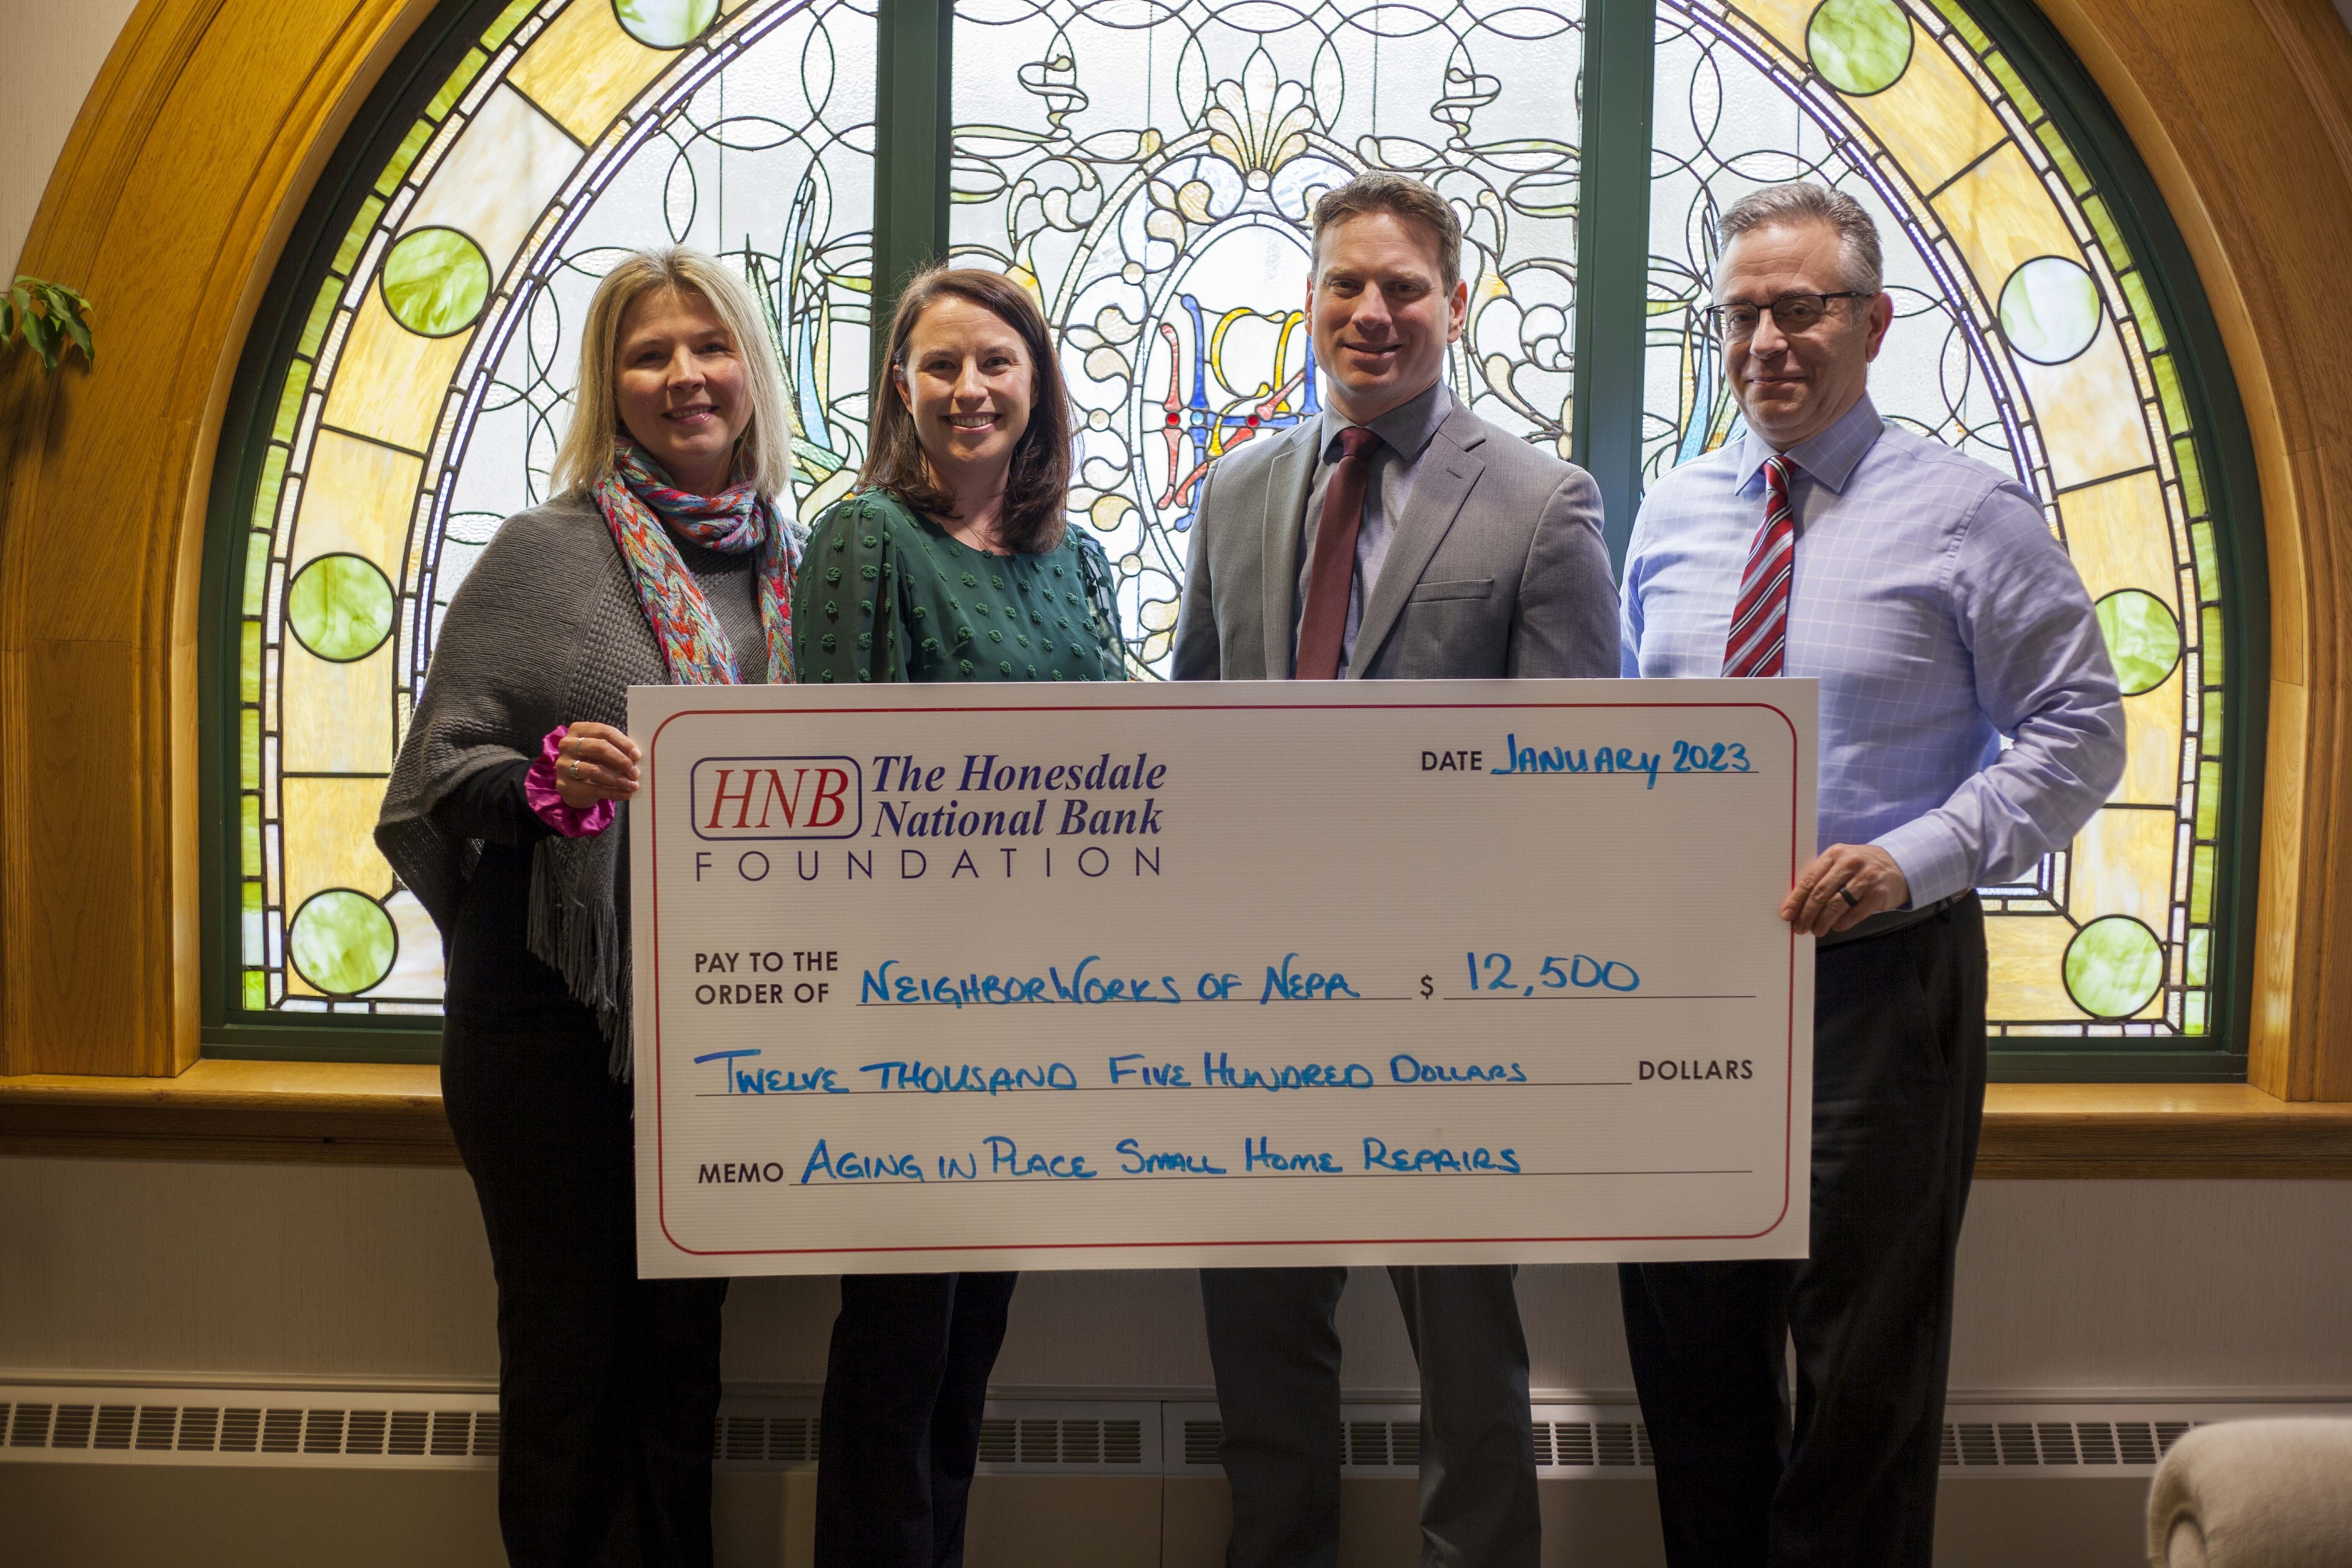 Honesdale National Bank Foundation makes contribution to NeighborWorks Aging in Place program